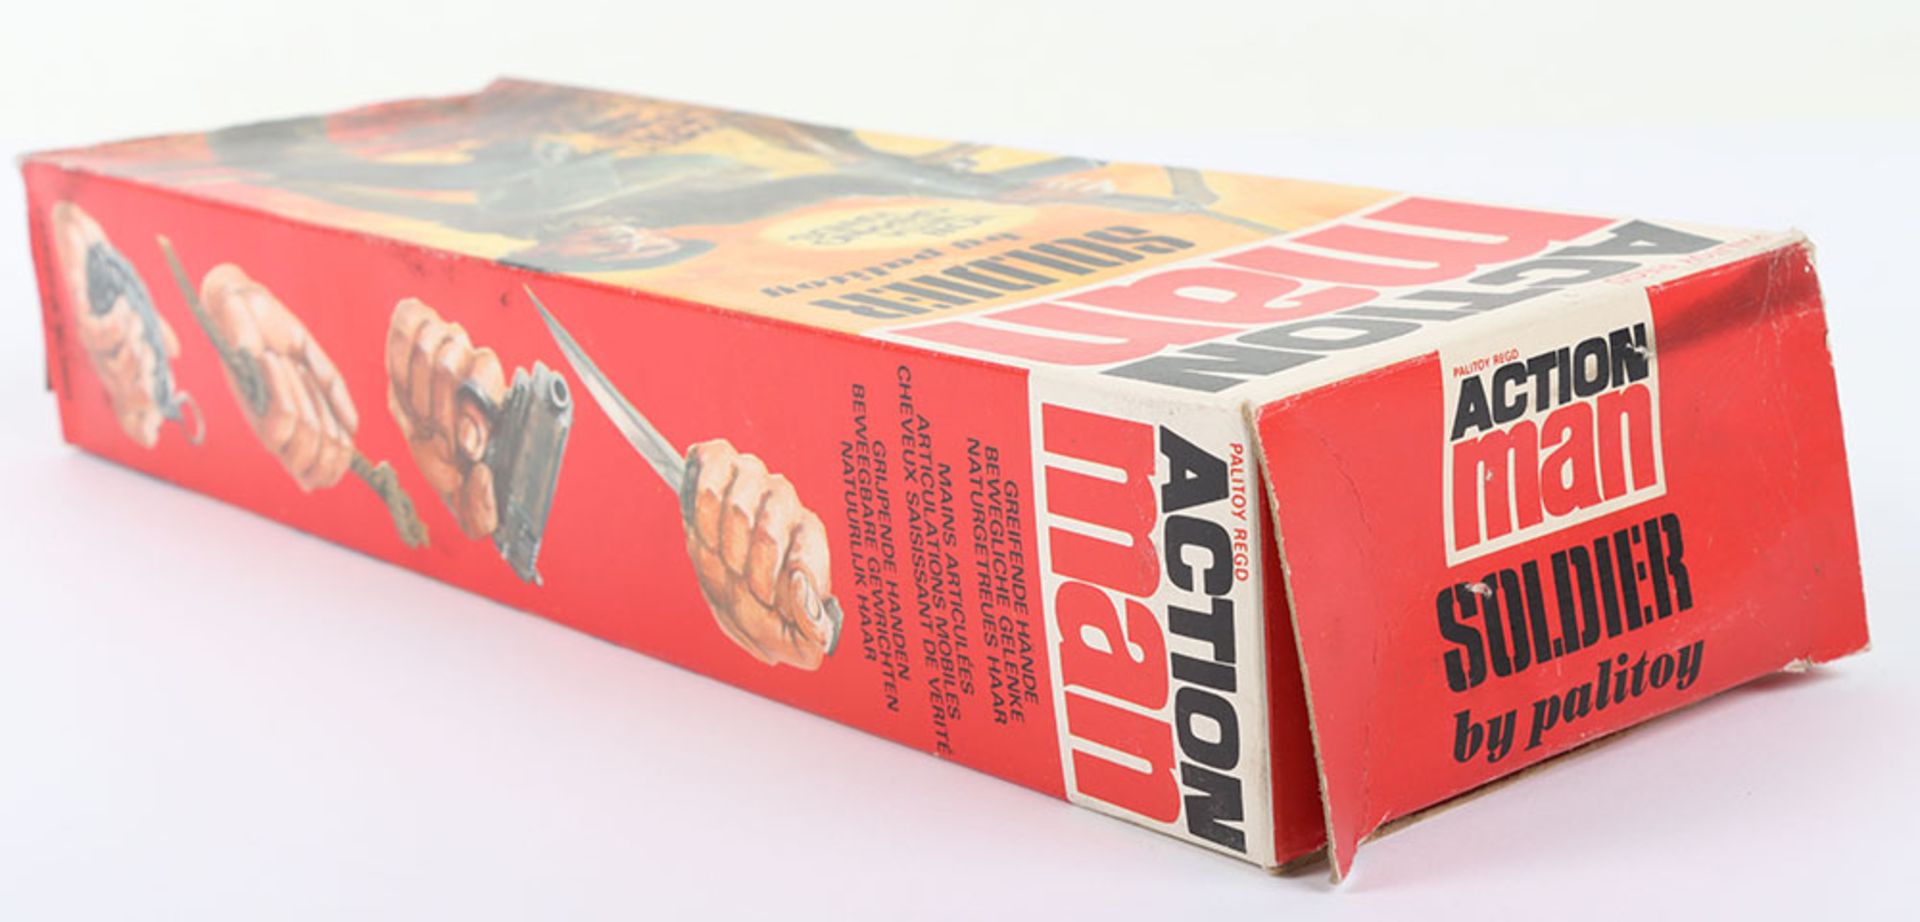 Action Man Boxed Vintage Soldier by Palitoy - Image 4 of 5